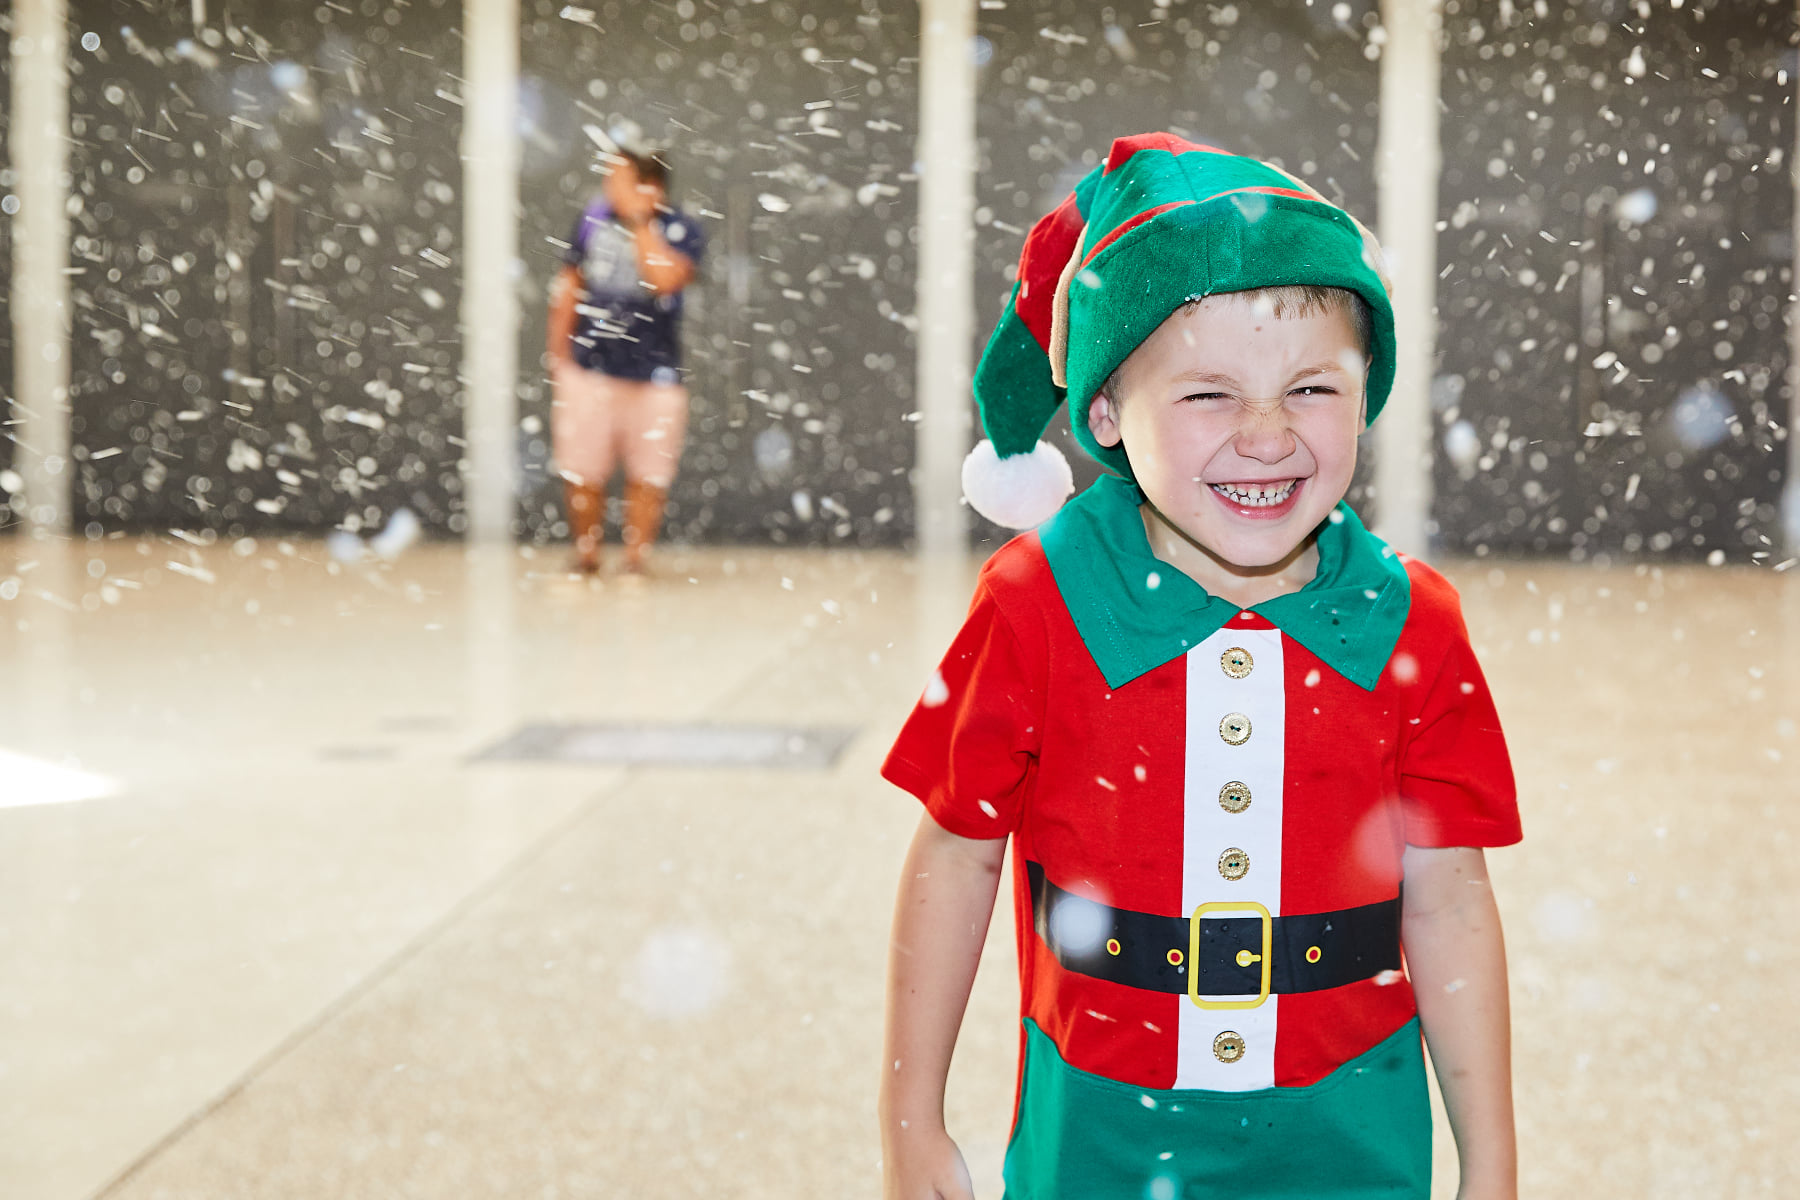 WIN 1 of 20 family passes to Santa’s Wonderland for a day of festive fun!